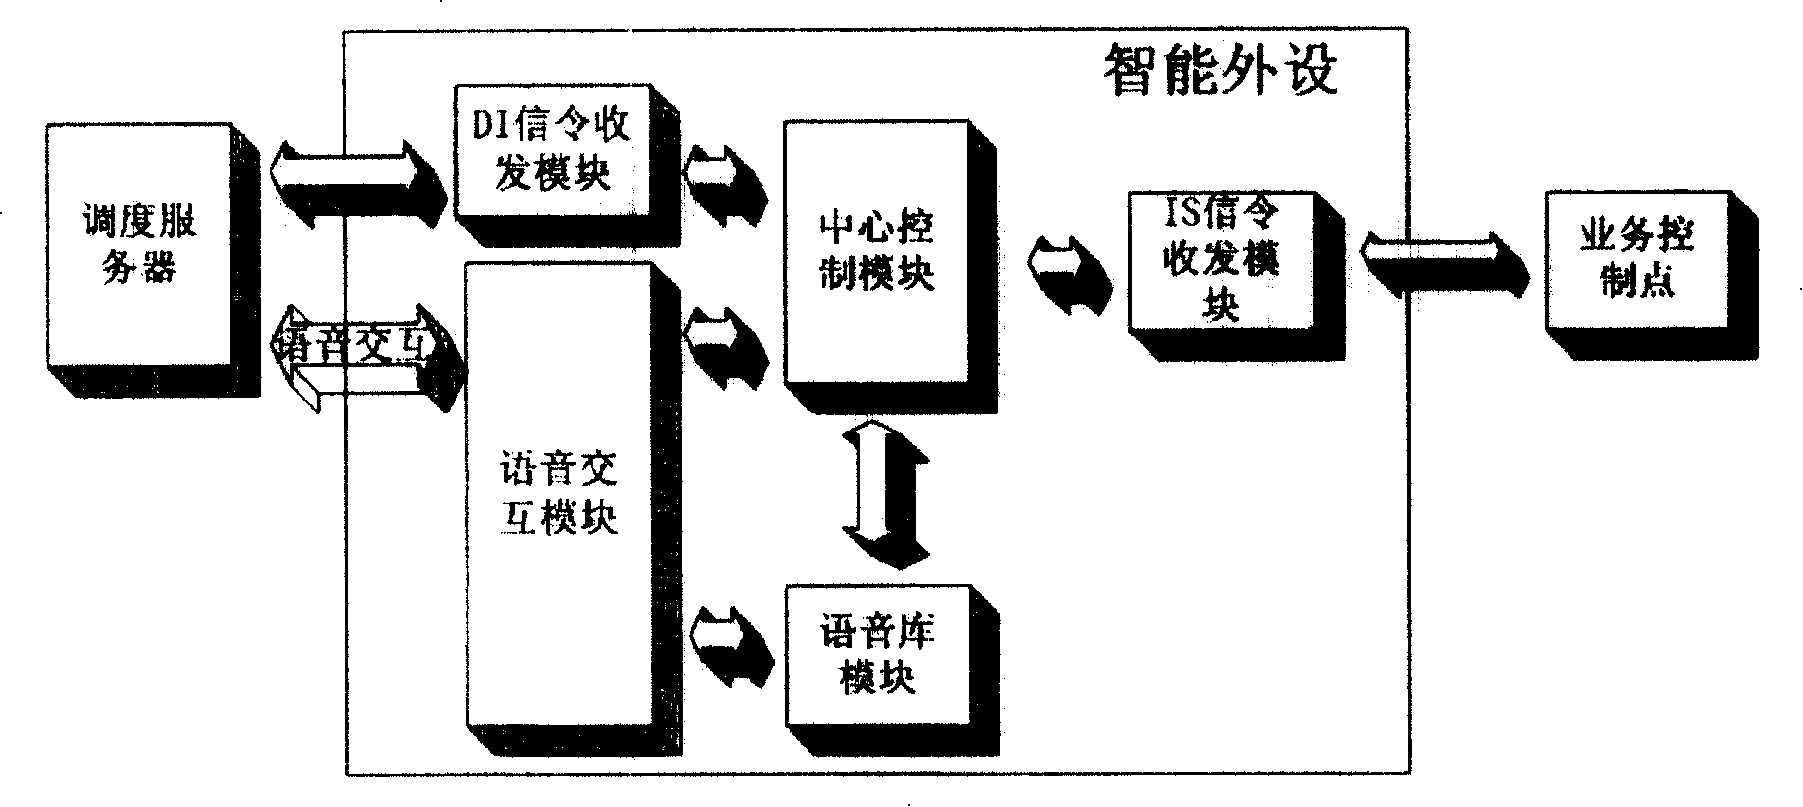 Method for realizing grouped telecommunication system and calling in intelligent network service